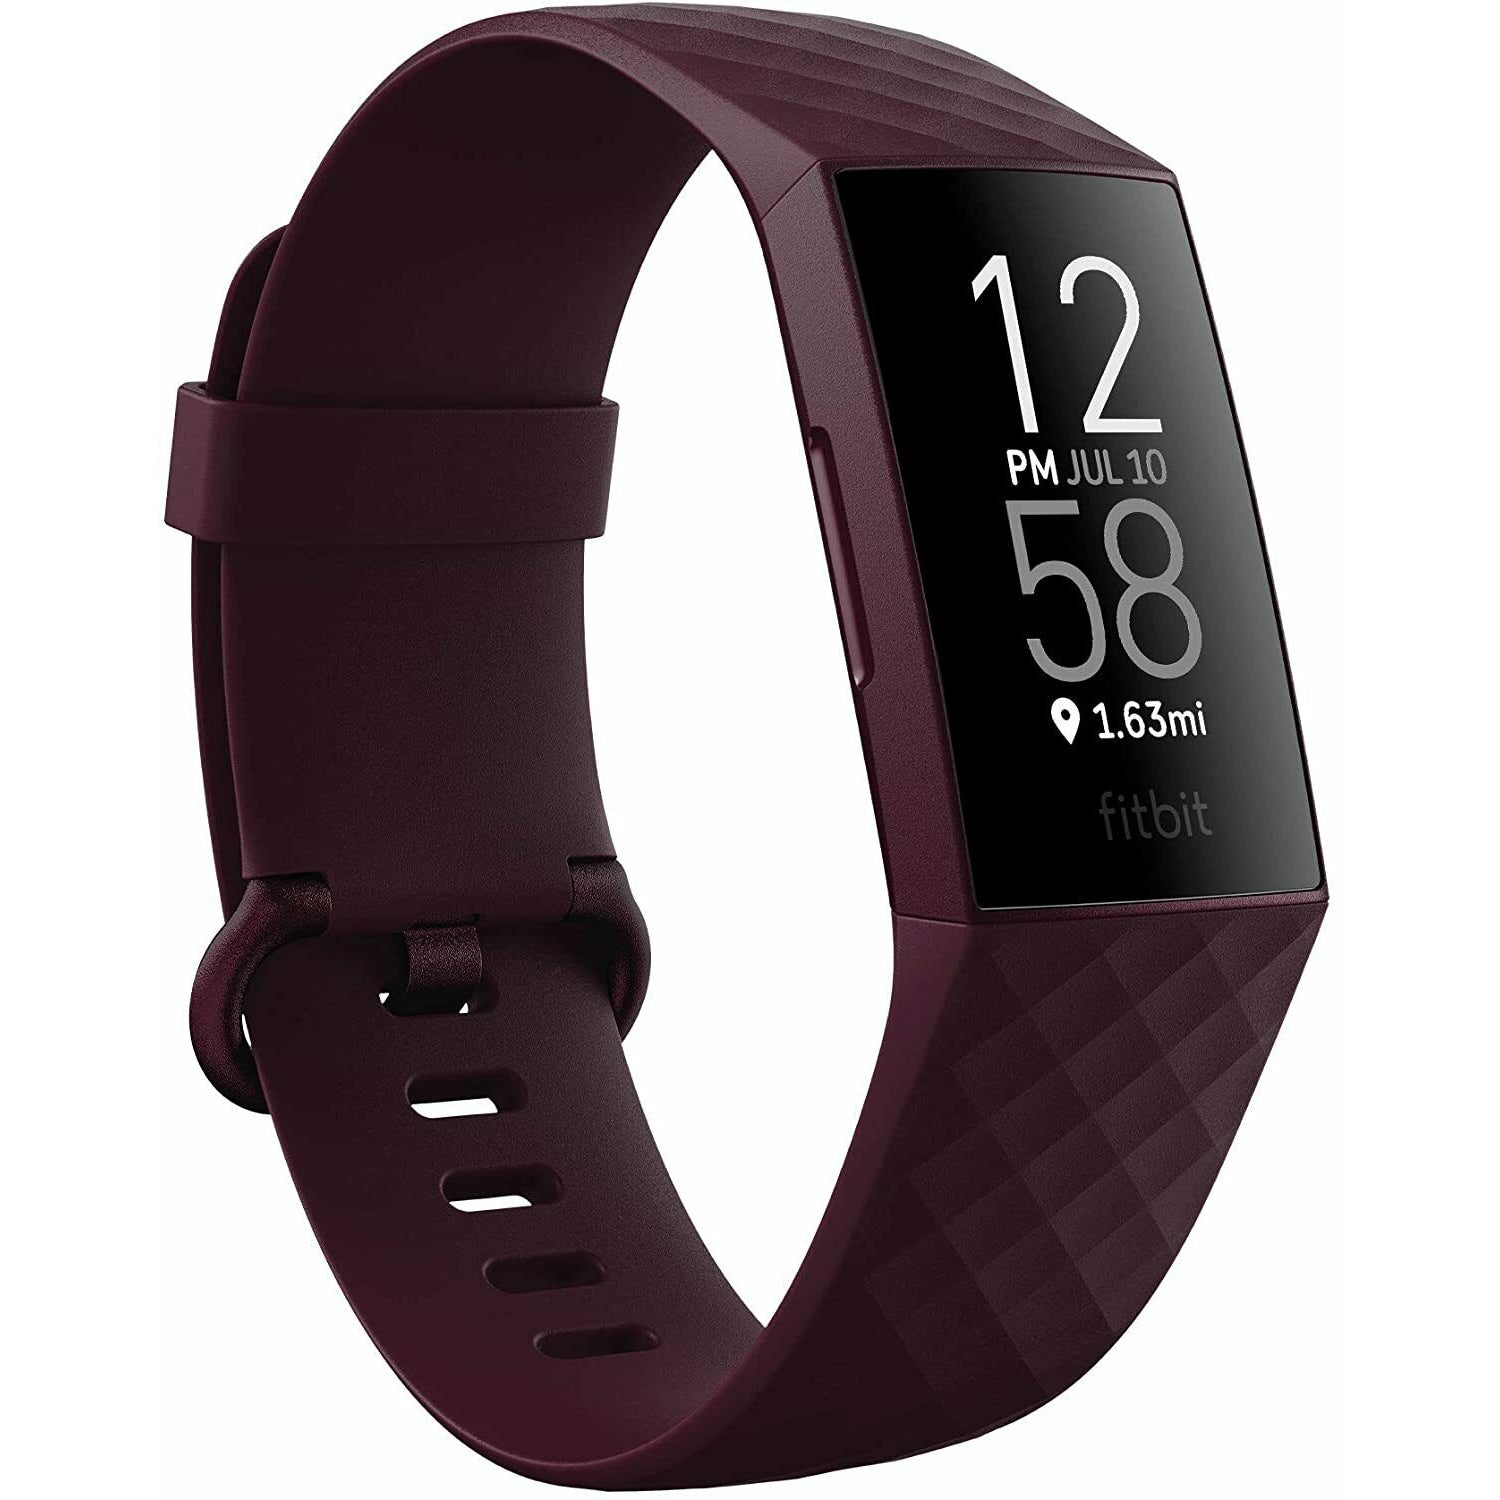 Fitbit Charge 4 Advanced Fitness Tracker with GPS - Rosewood - Refurbished Good